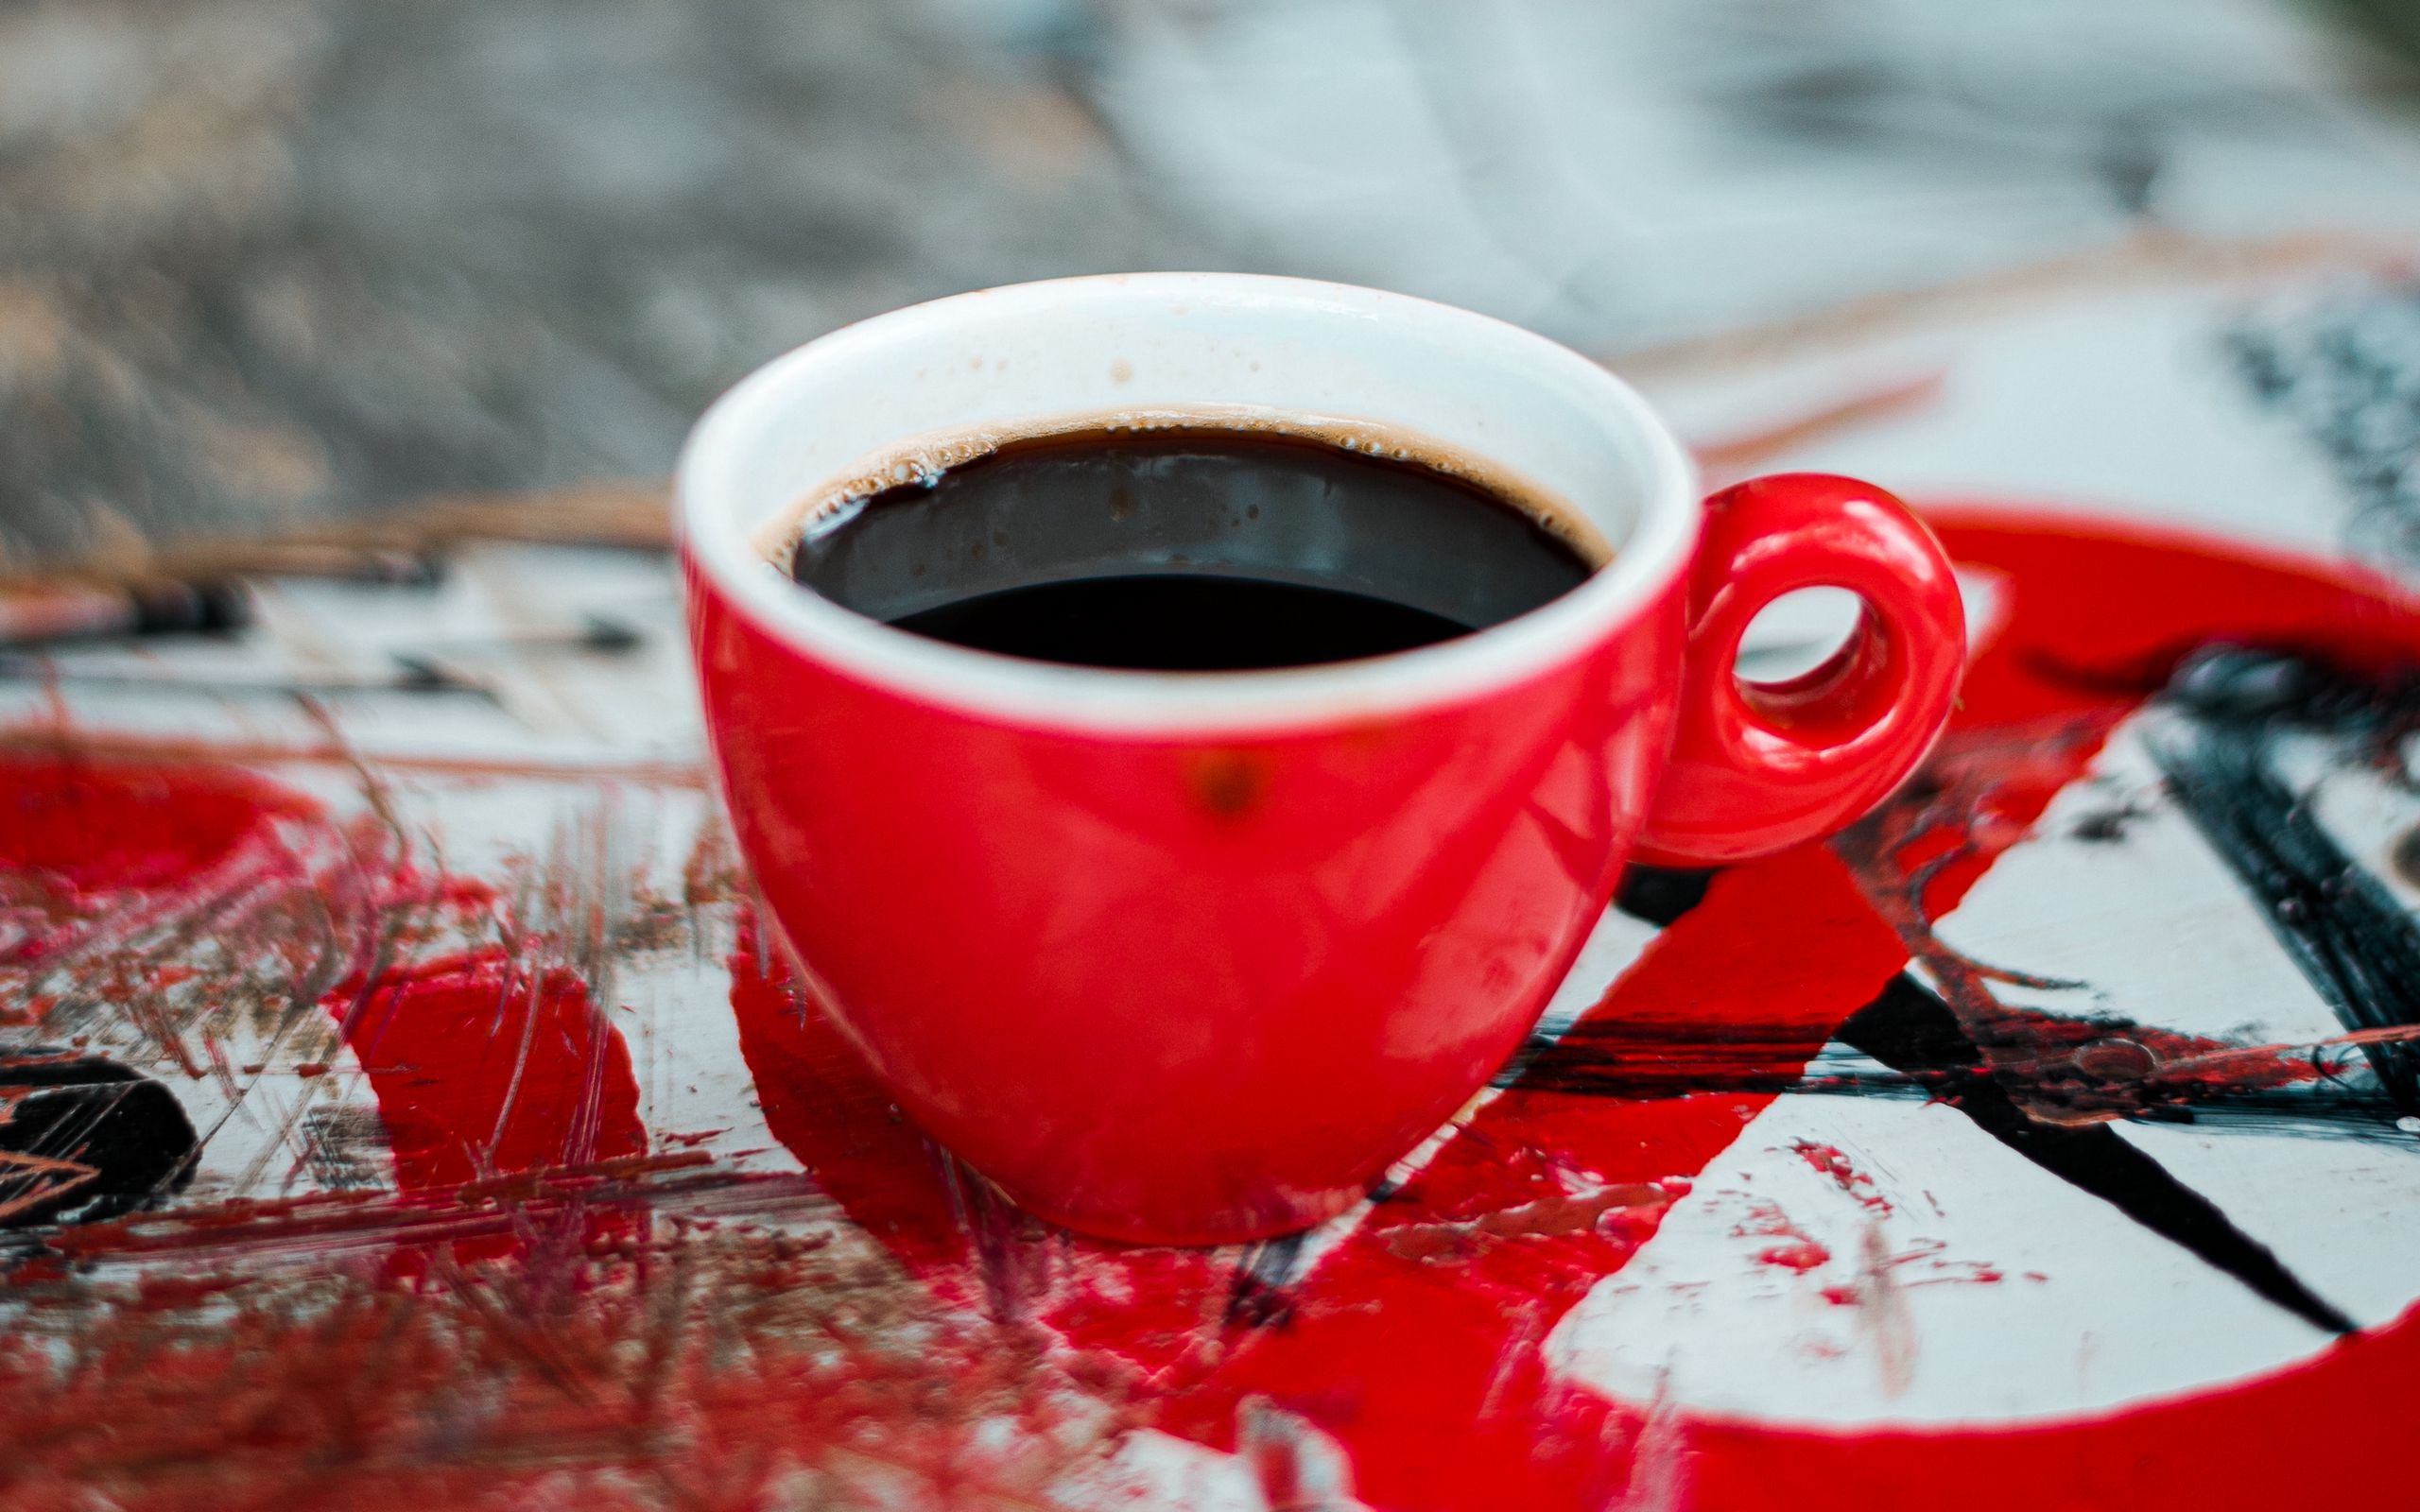 Download wallpaper 2560x1600 cup, coffee, red, drink widescreen 16:10 HD background